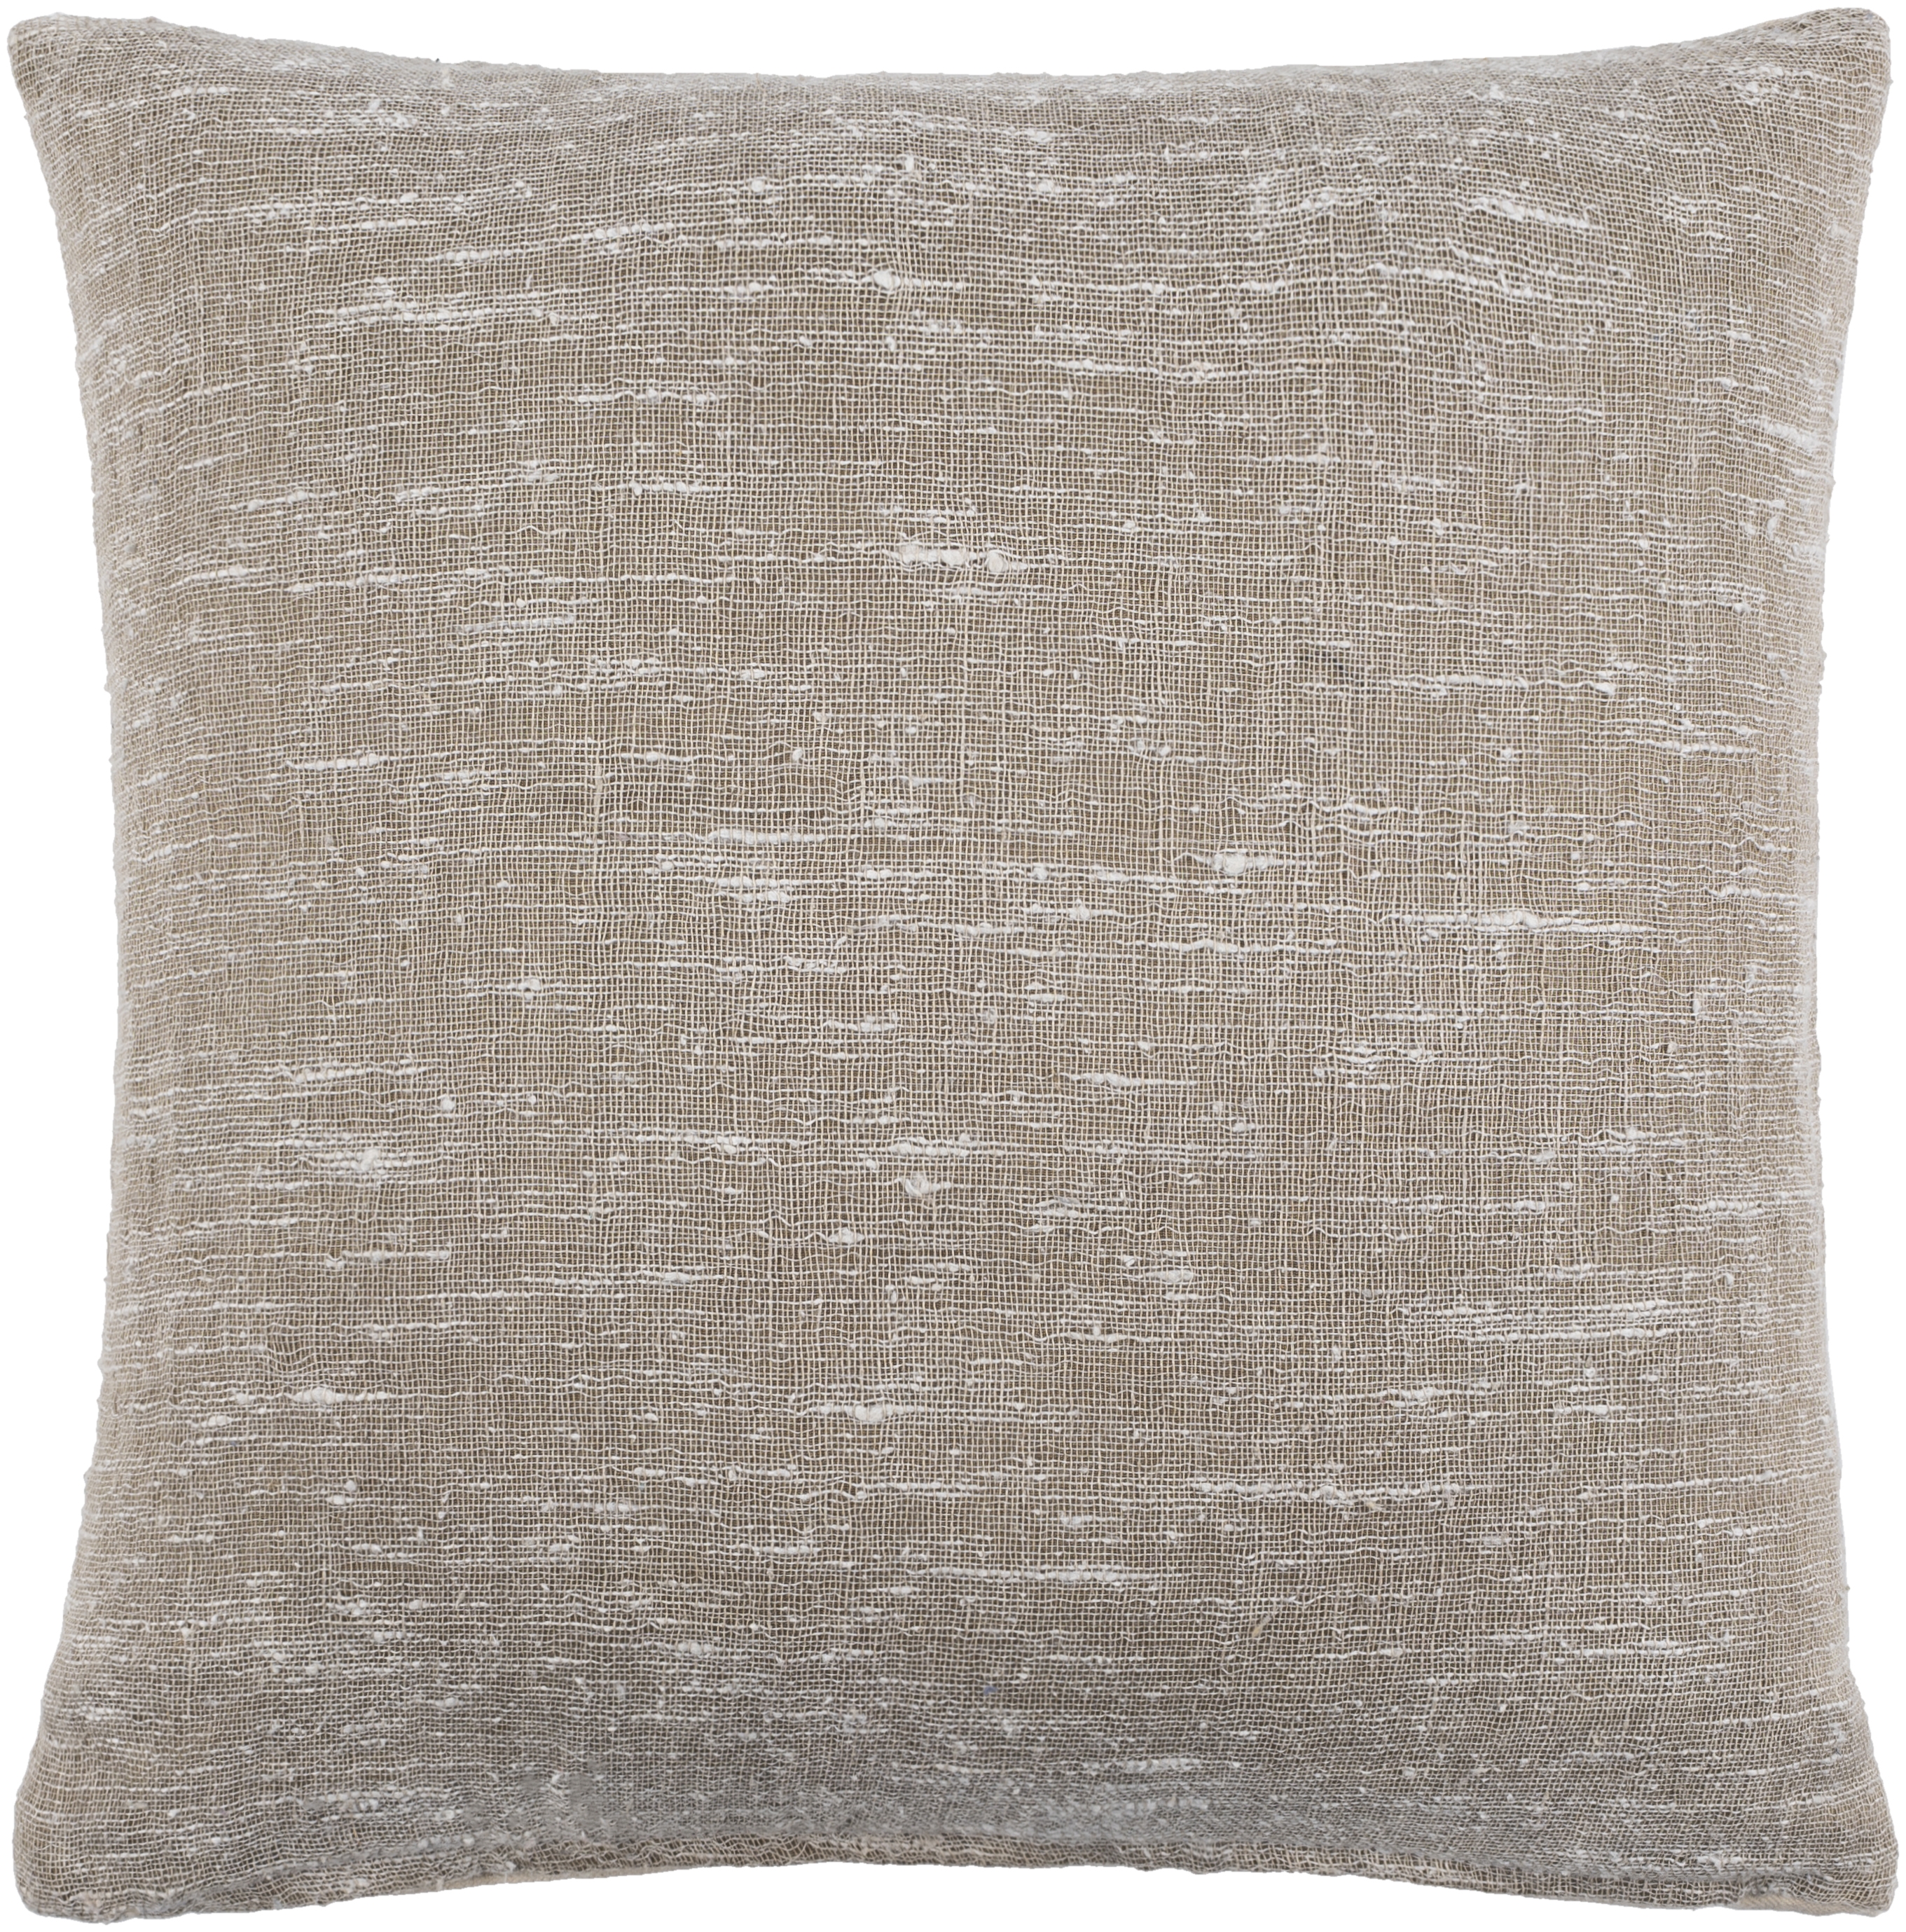 Romona Throw Pillow, 22" x 22", with poly insert - Image 0